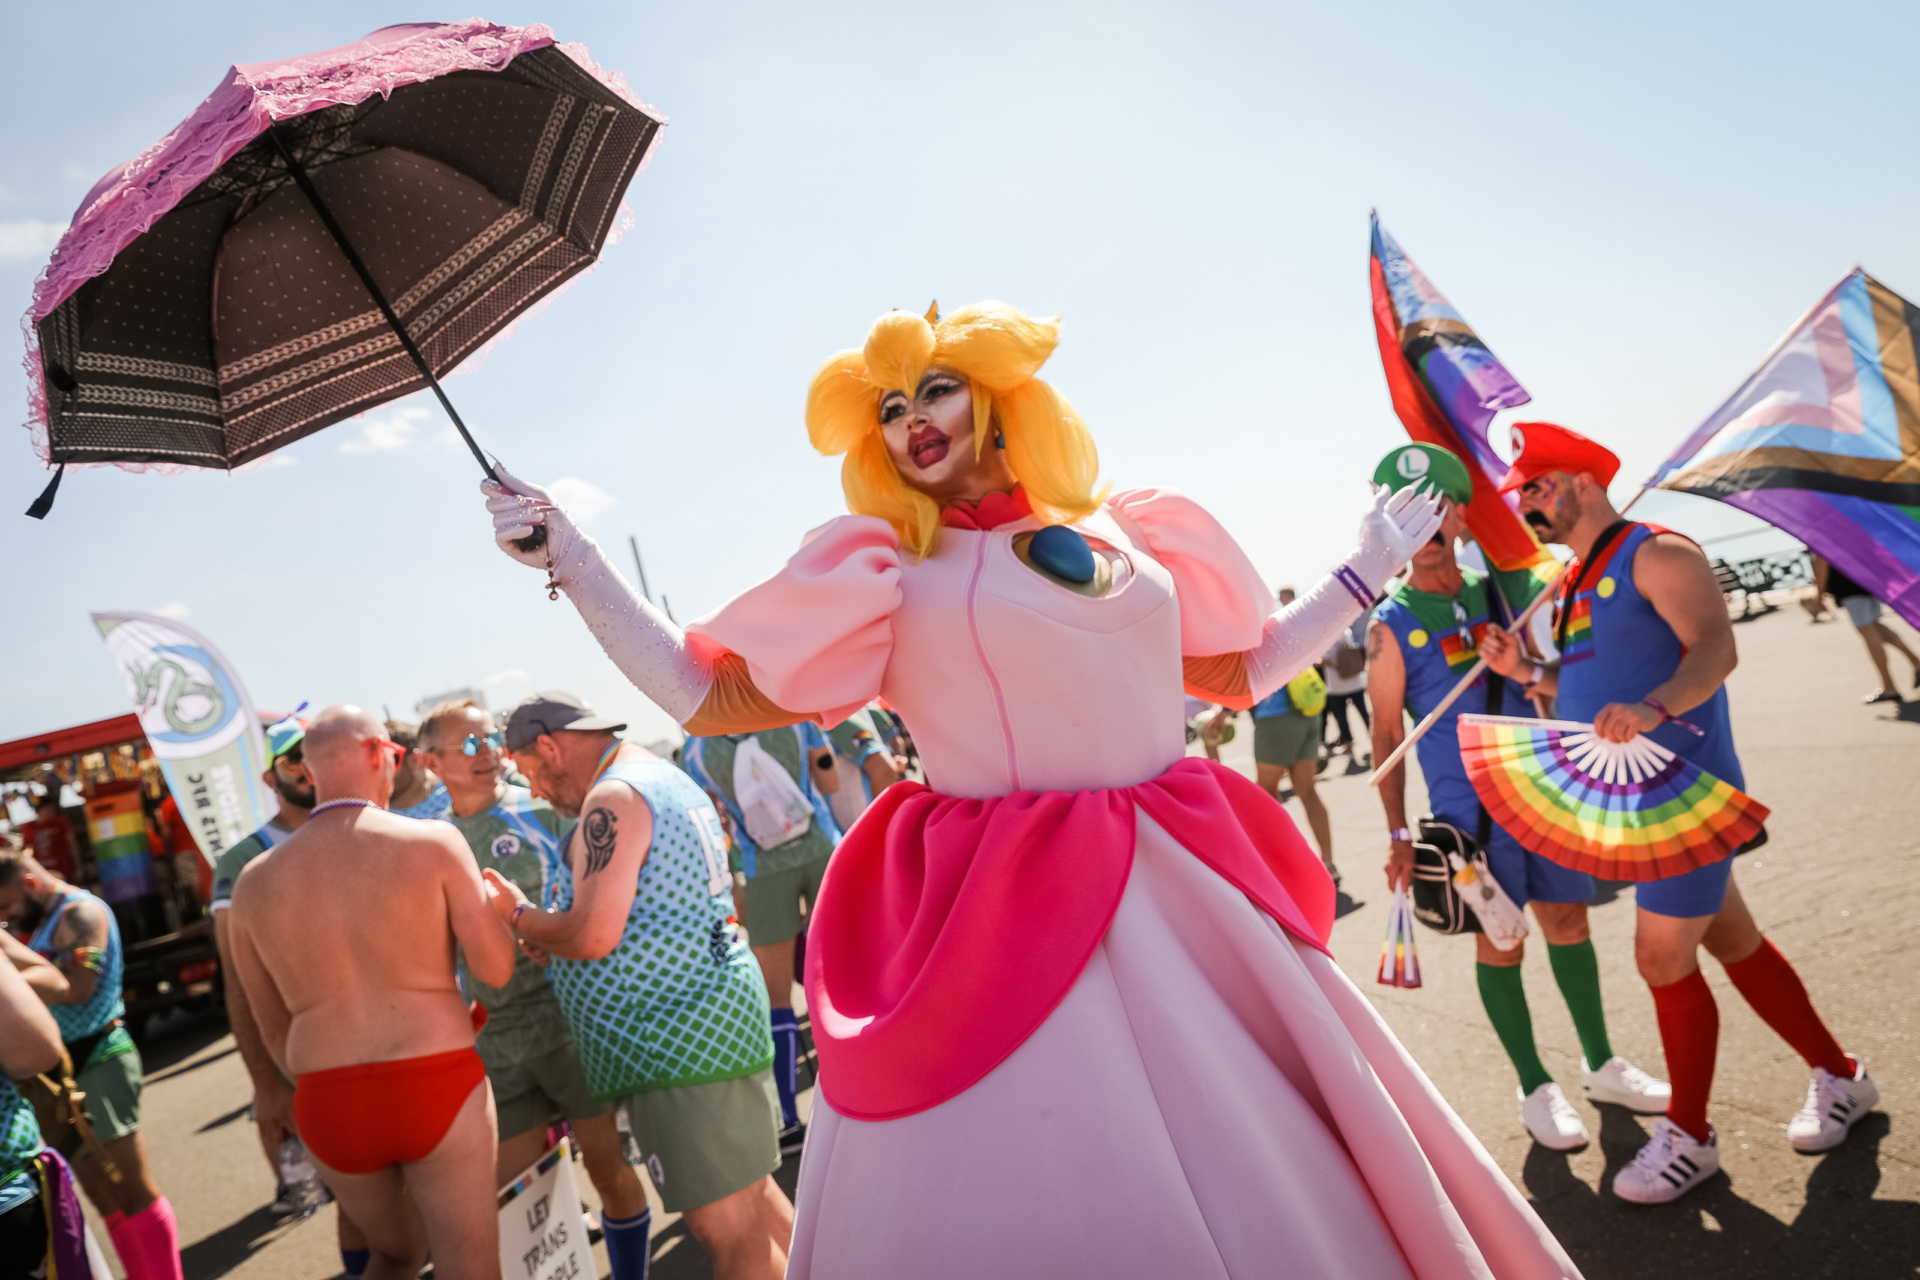  Festival goers participate in the Pride LGBTQ+ Community Parade – ‘Love, Protest & Unity’ during Brighton Pride on August 06, 2022 in Brighton, England. (Photo by Tristan Fewings/Getty Images)